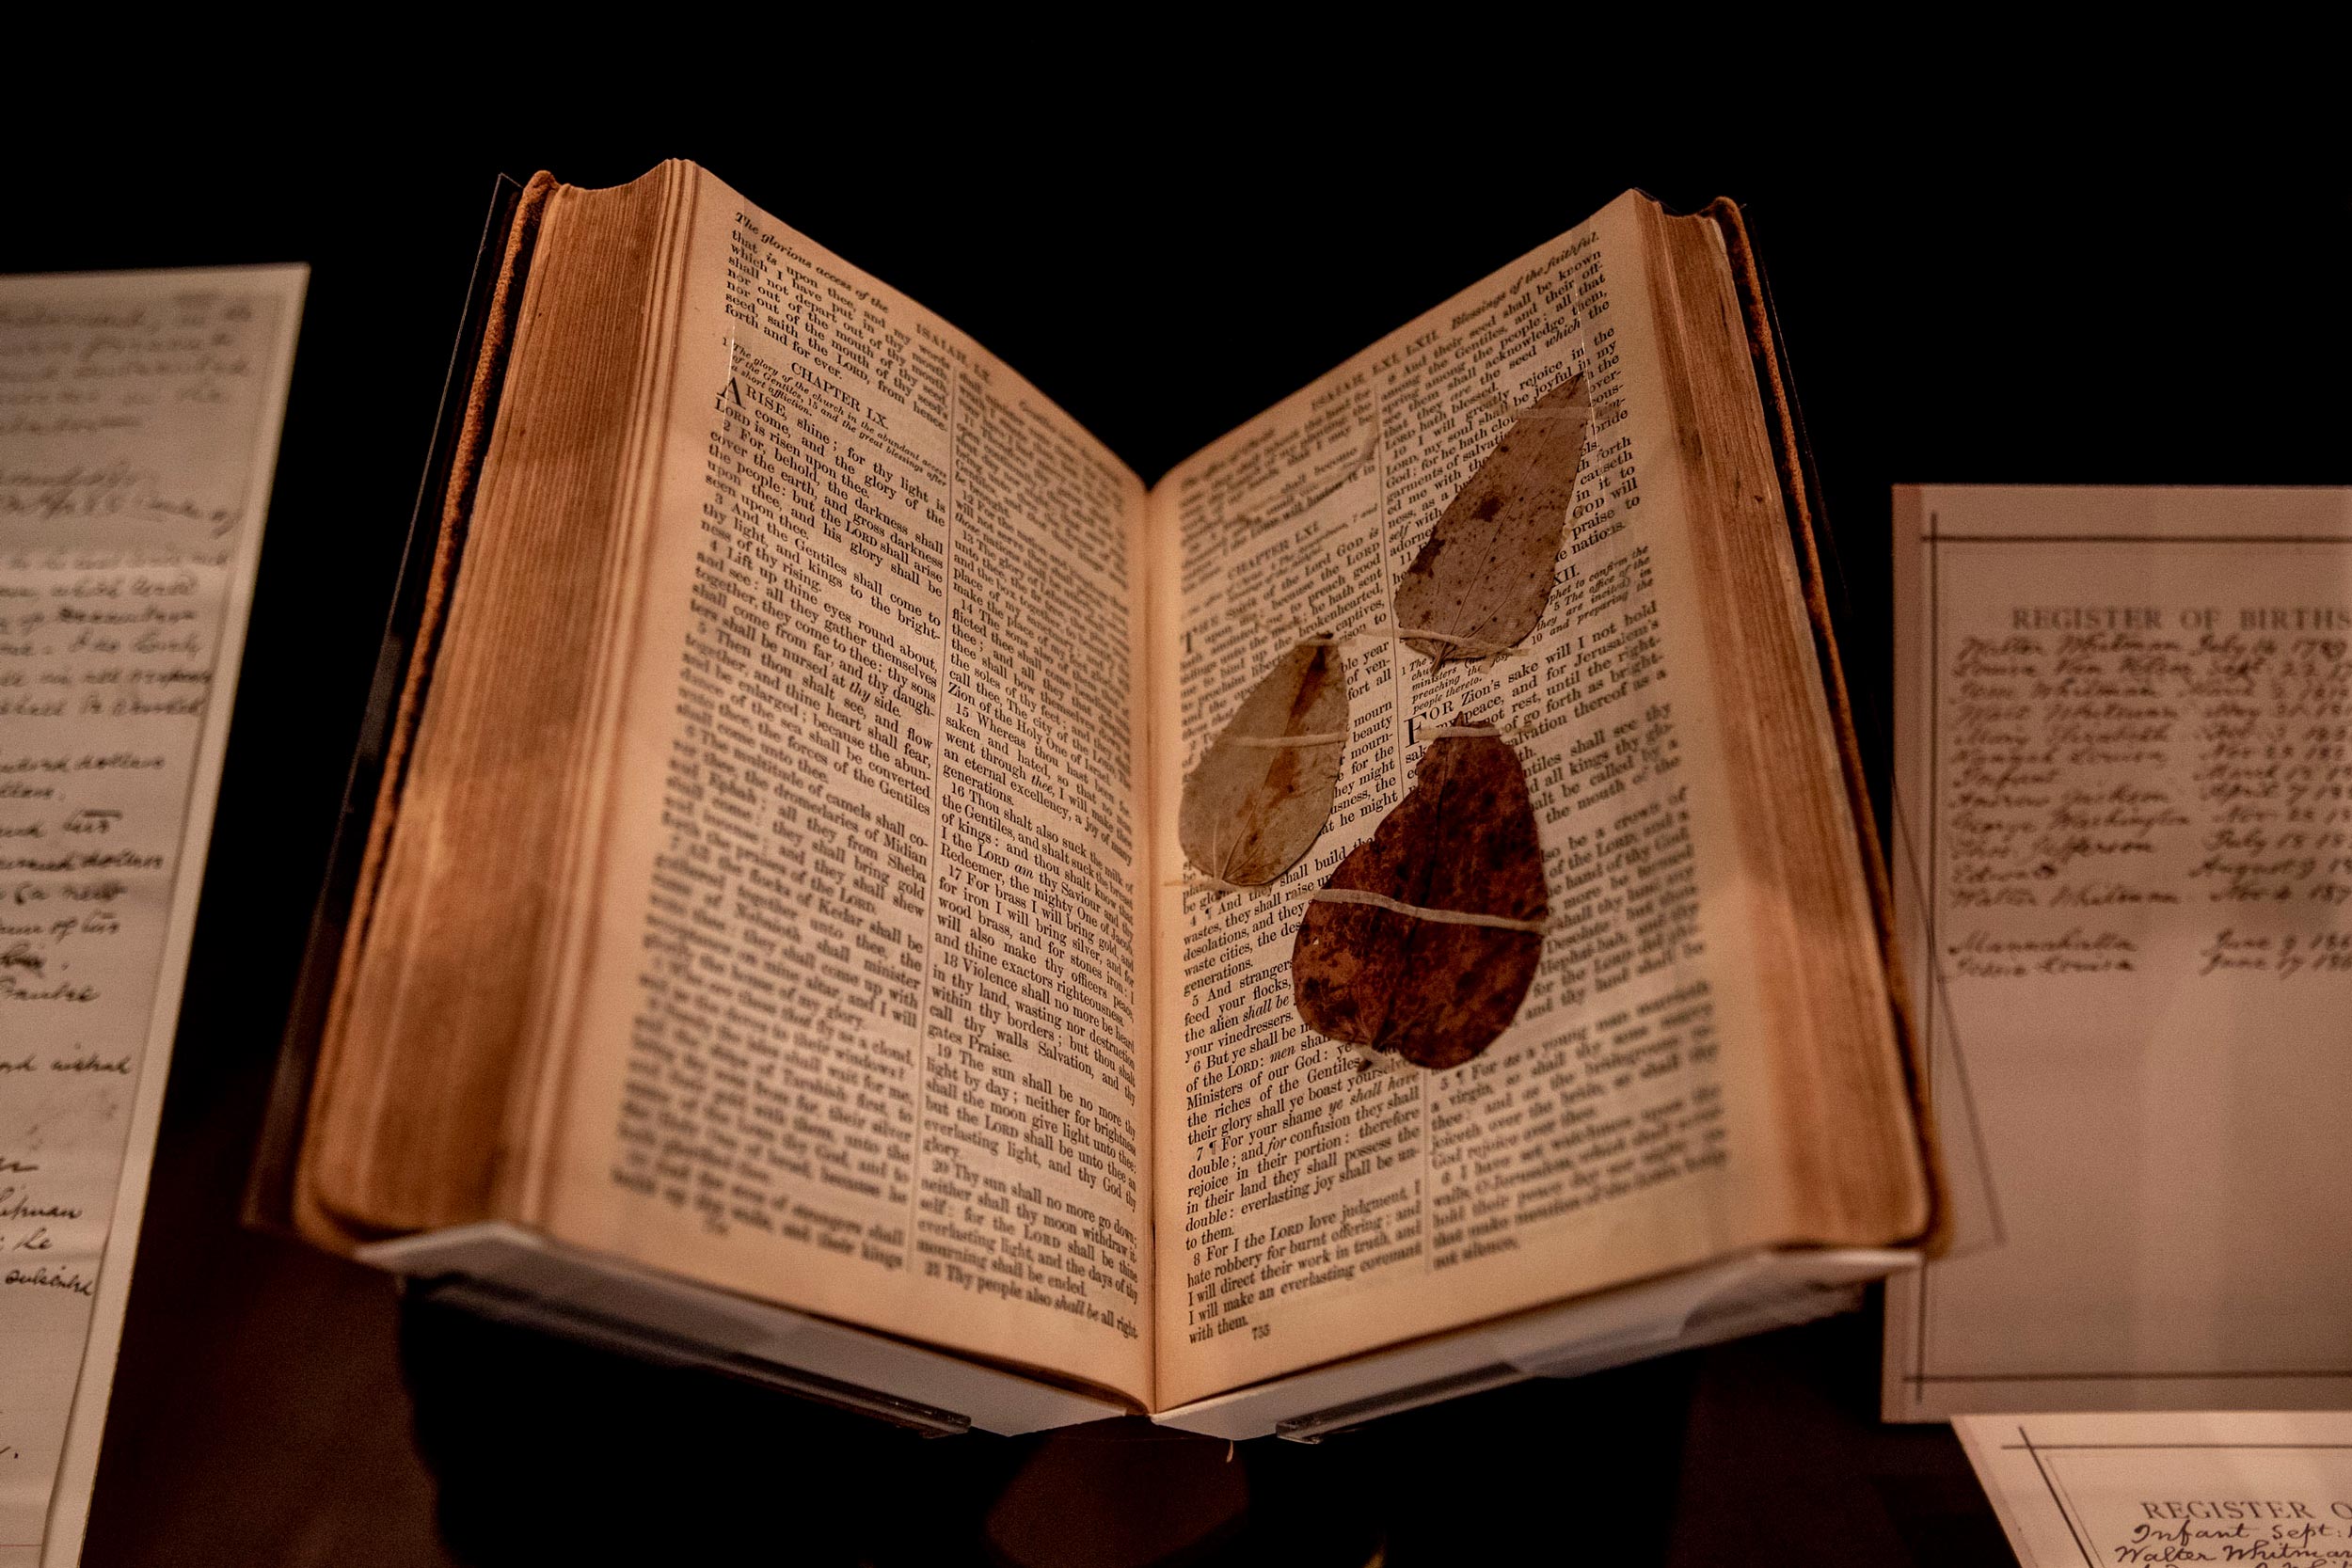 Opened book with leaves on its pages in a glass case